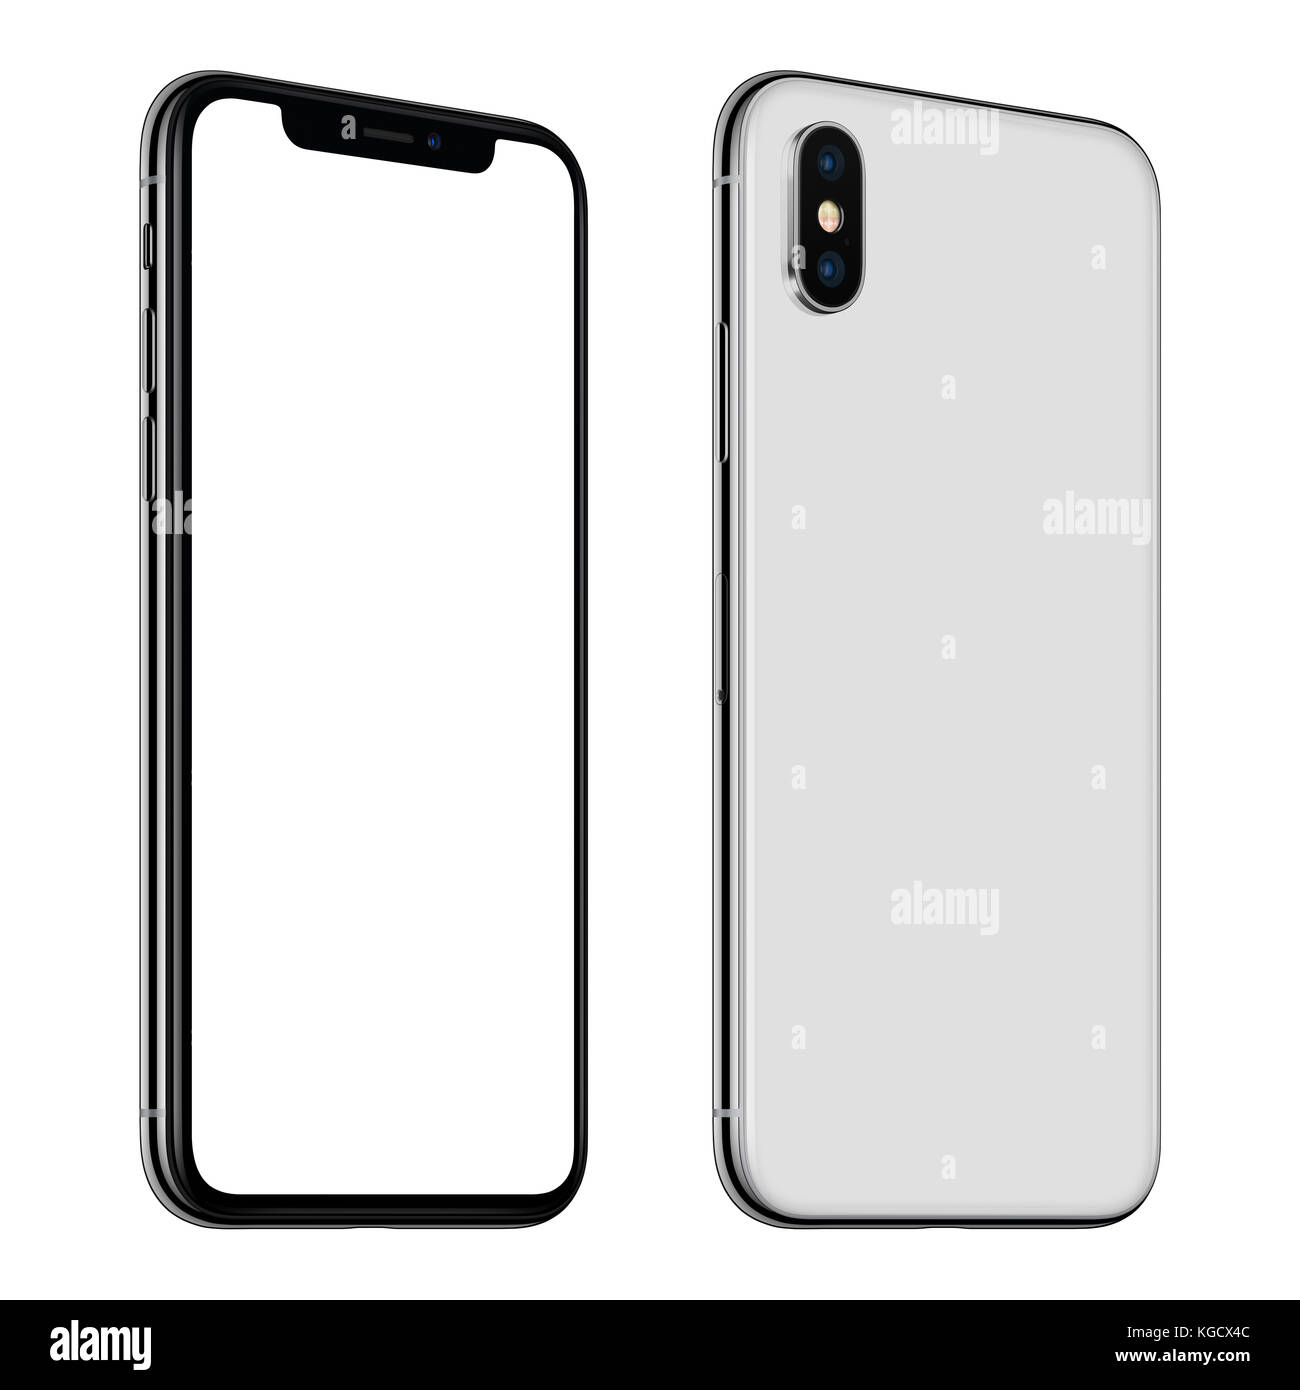 New white smartphone mockup similar to iPhone X front and back sides ...